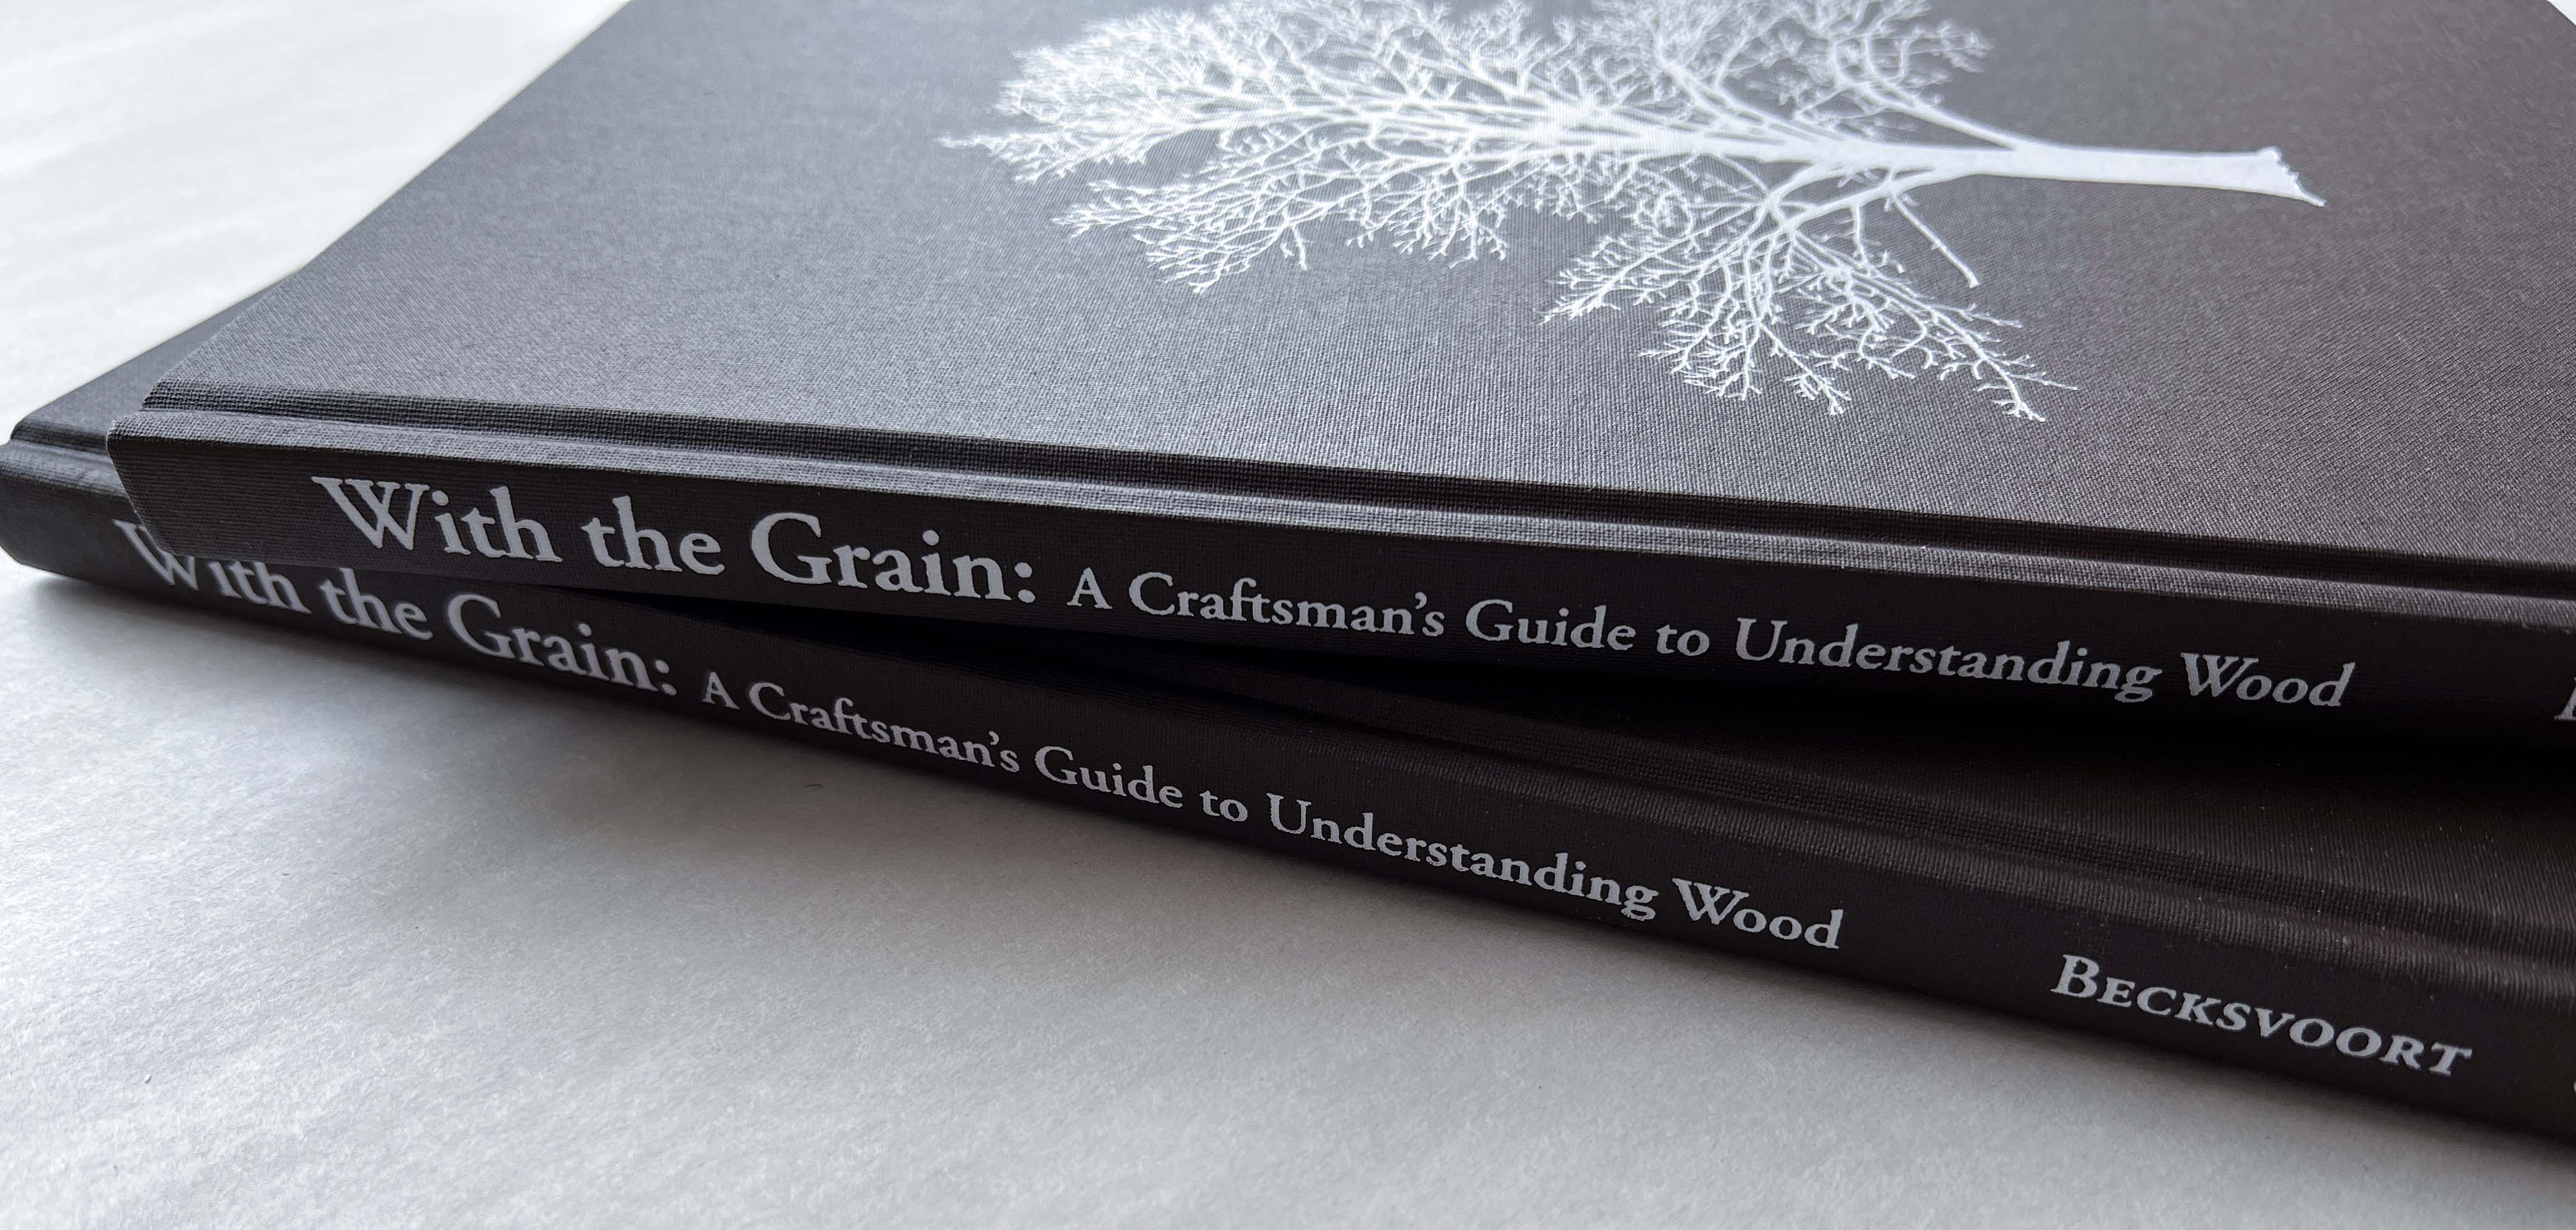 With the Grain: A Craftsman's Guide to Understanding Wood